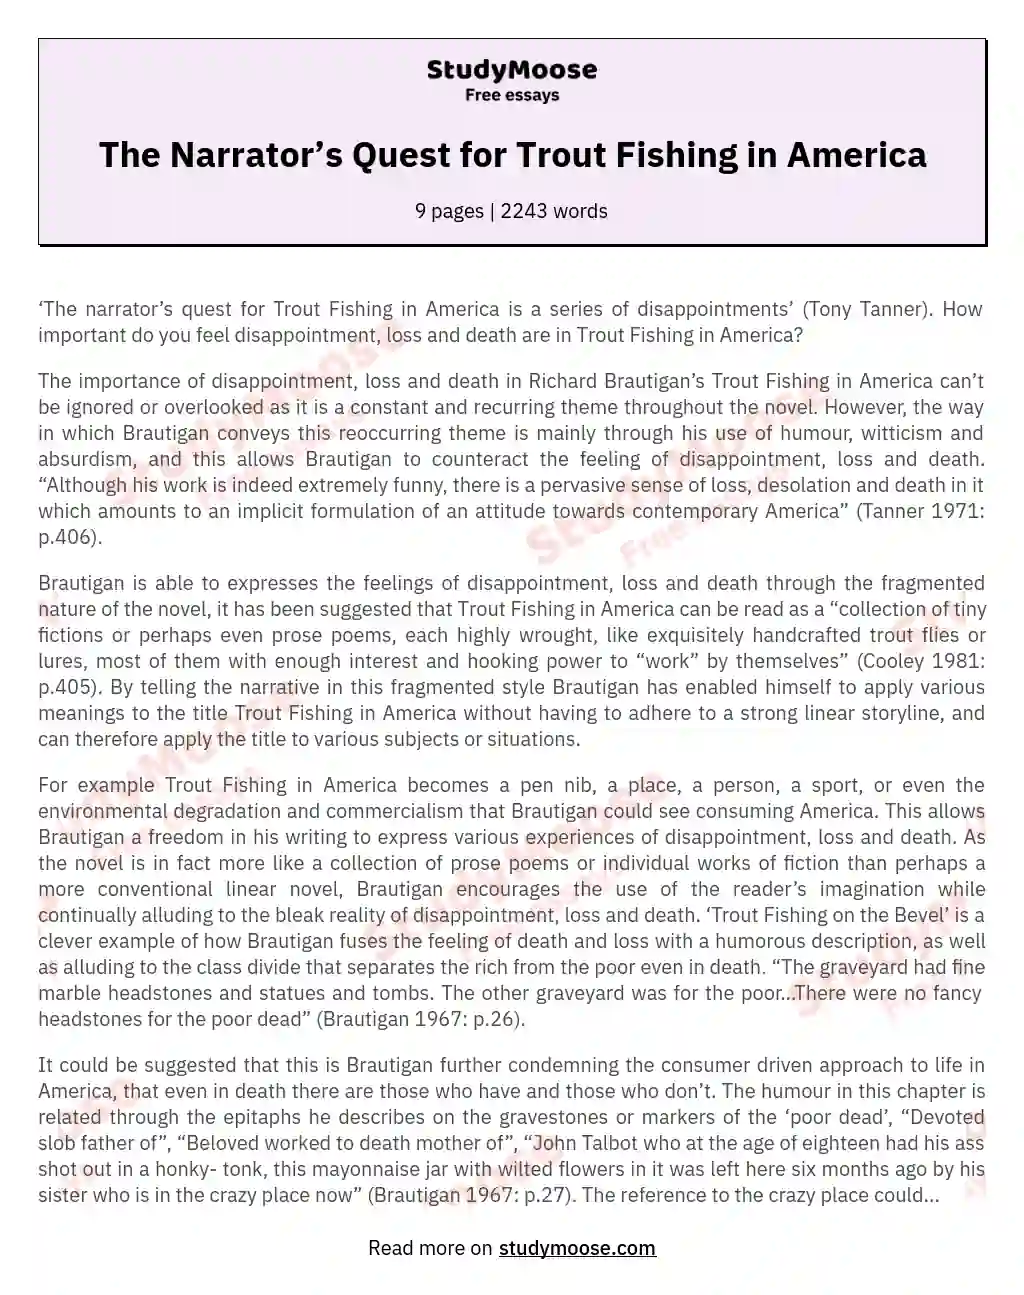 The Narrator’s Quest for Trout Fishing in America